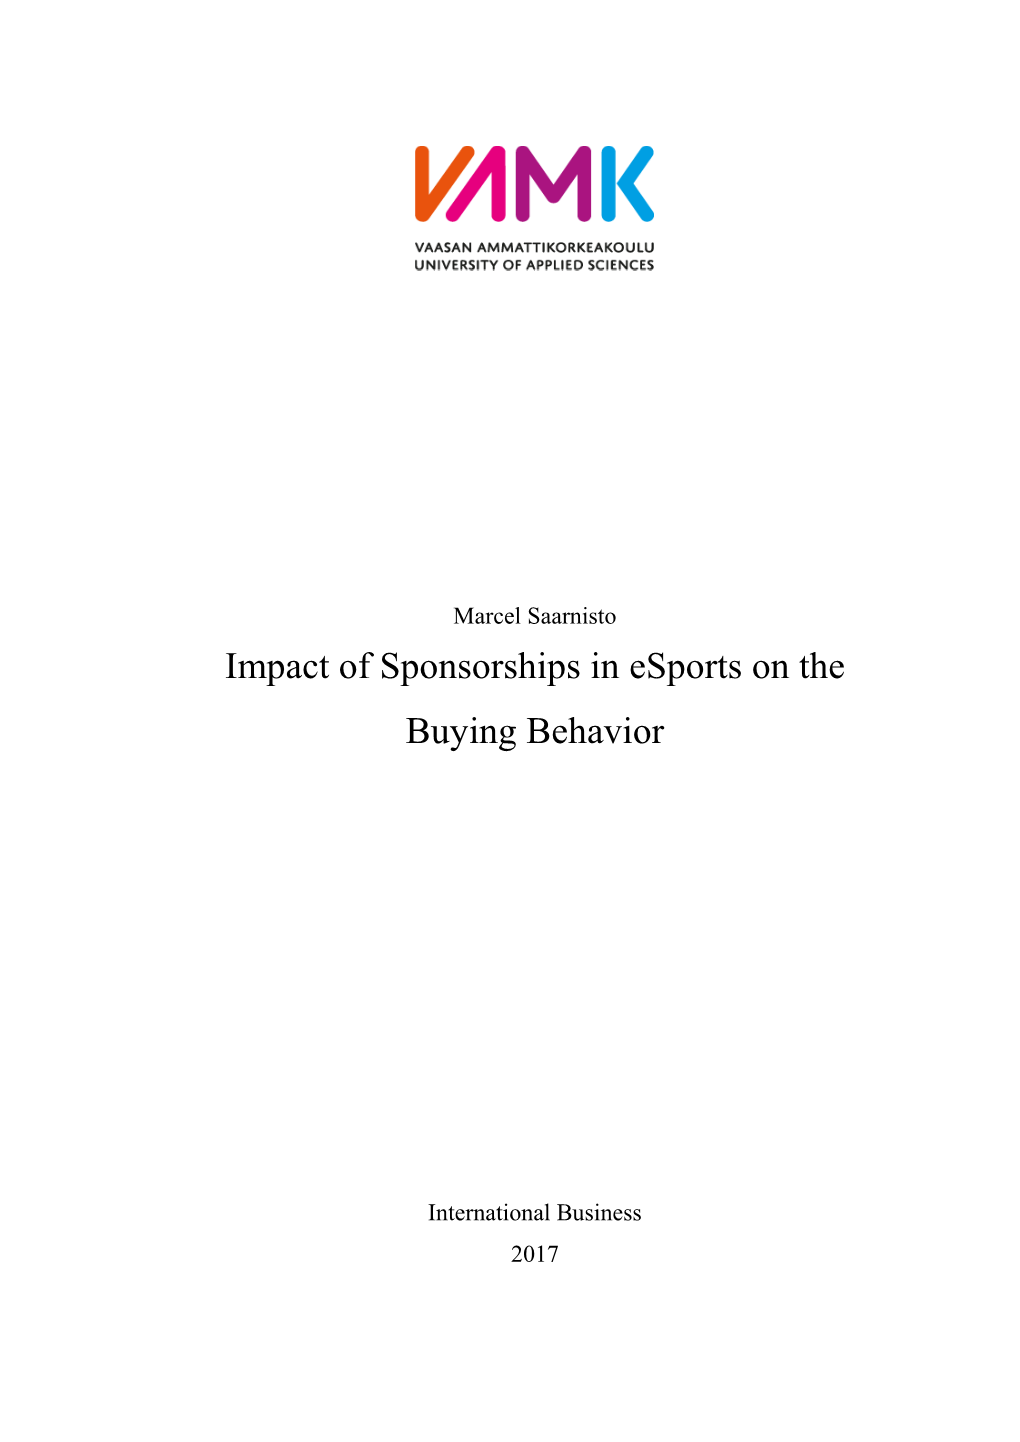 Impact of Sponsorships in Esports on the Buying Behavior